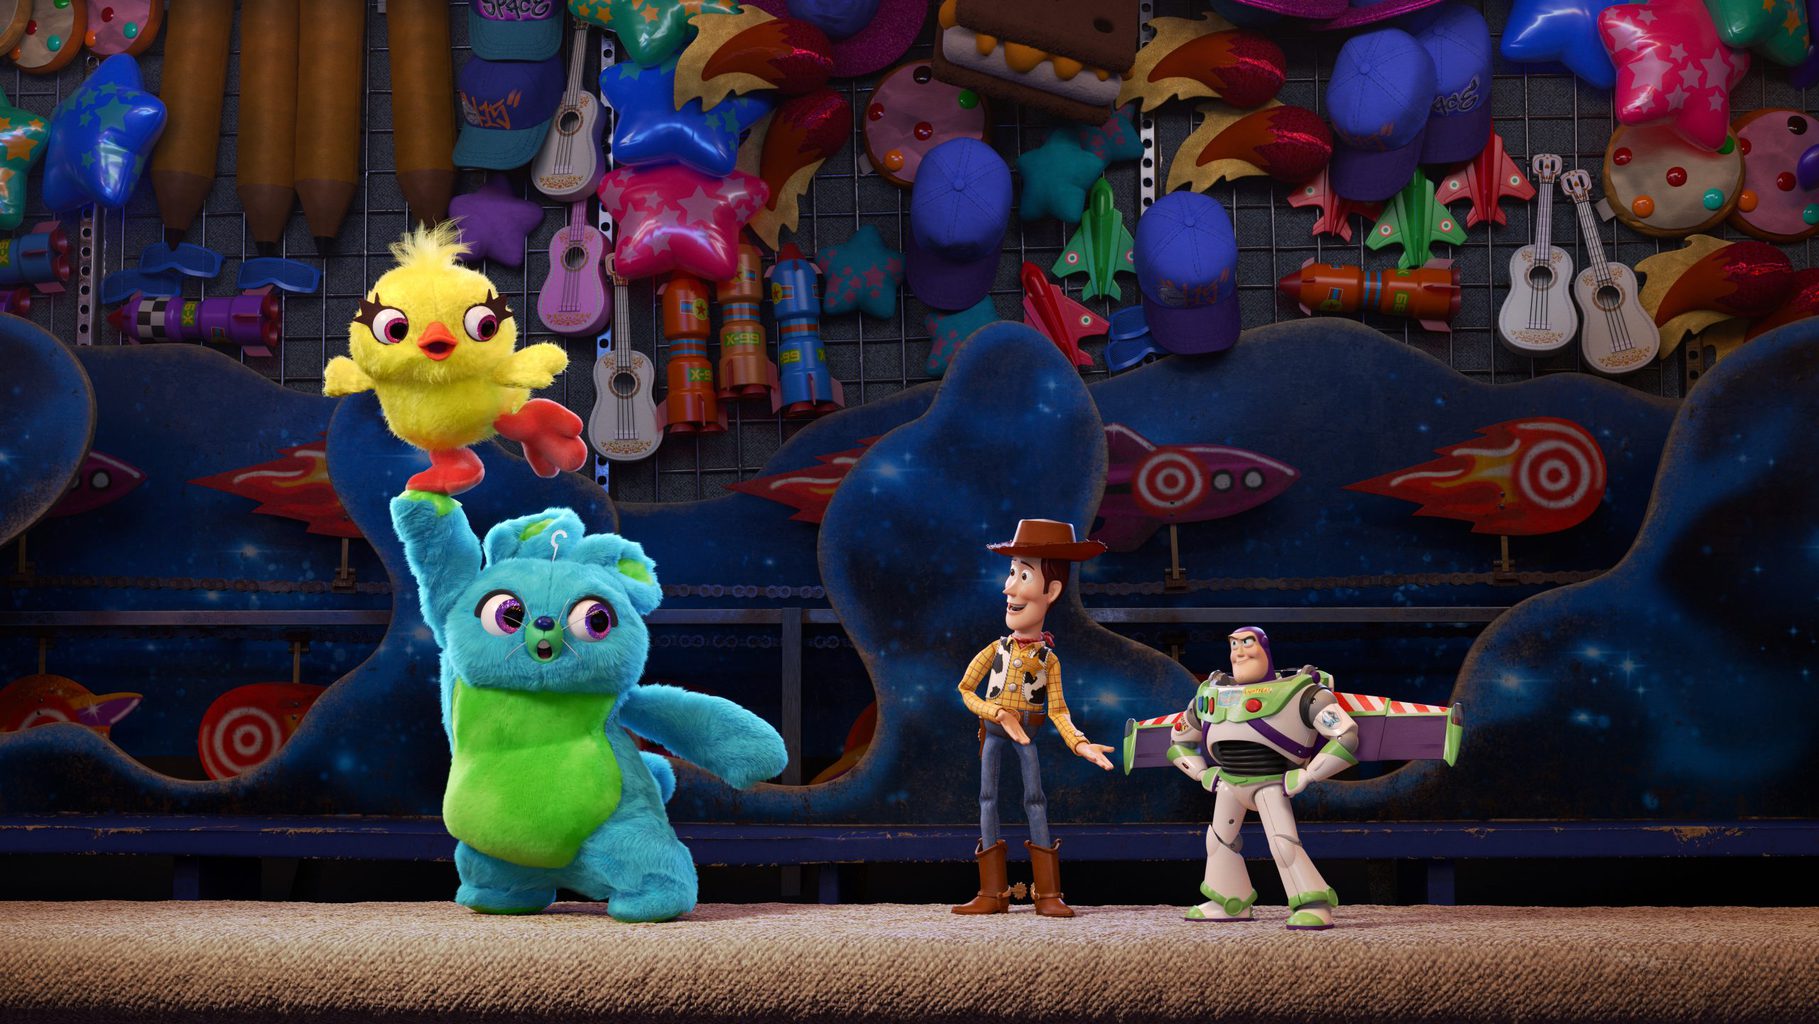 Toy Story 4 - Meet the Characters